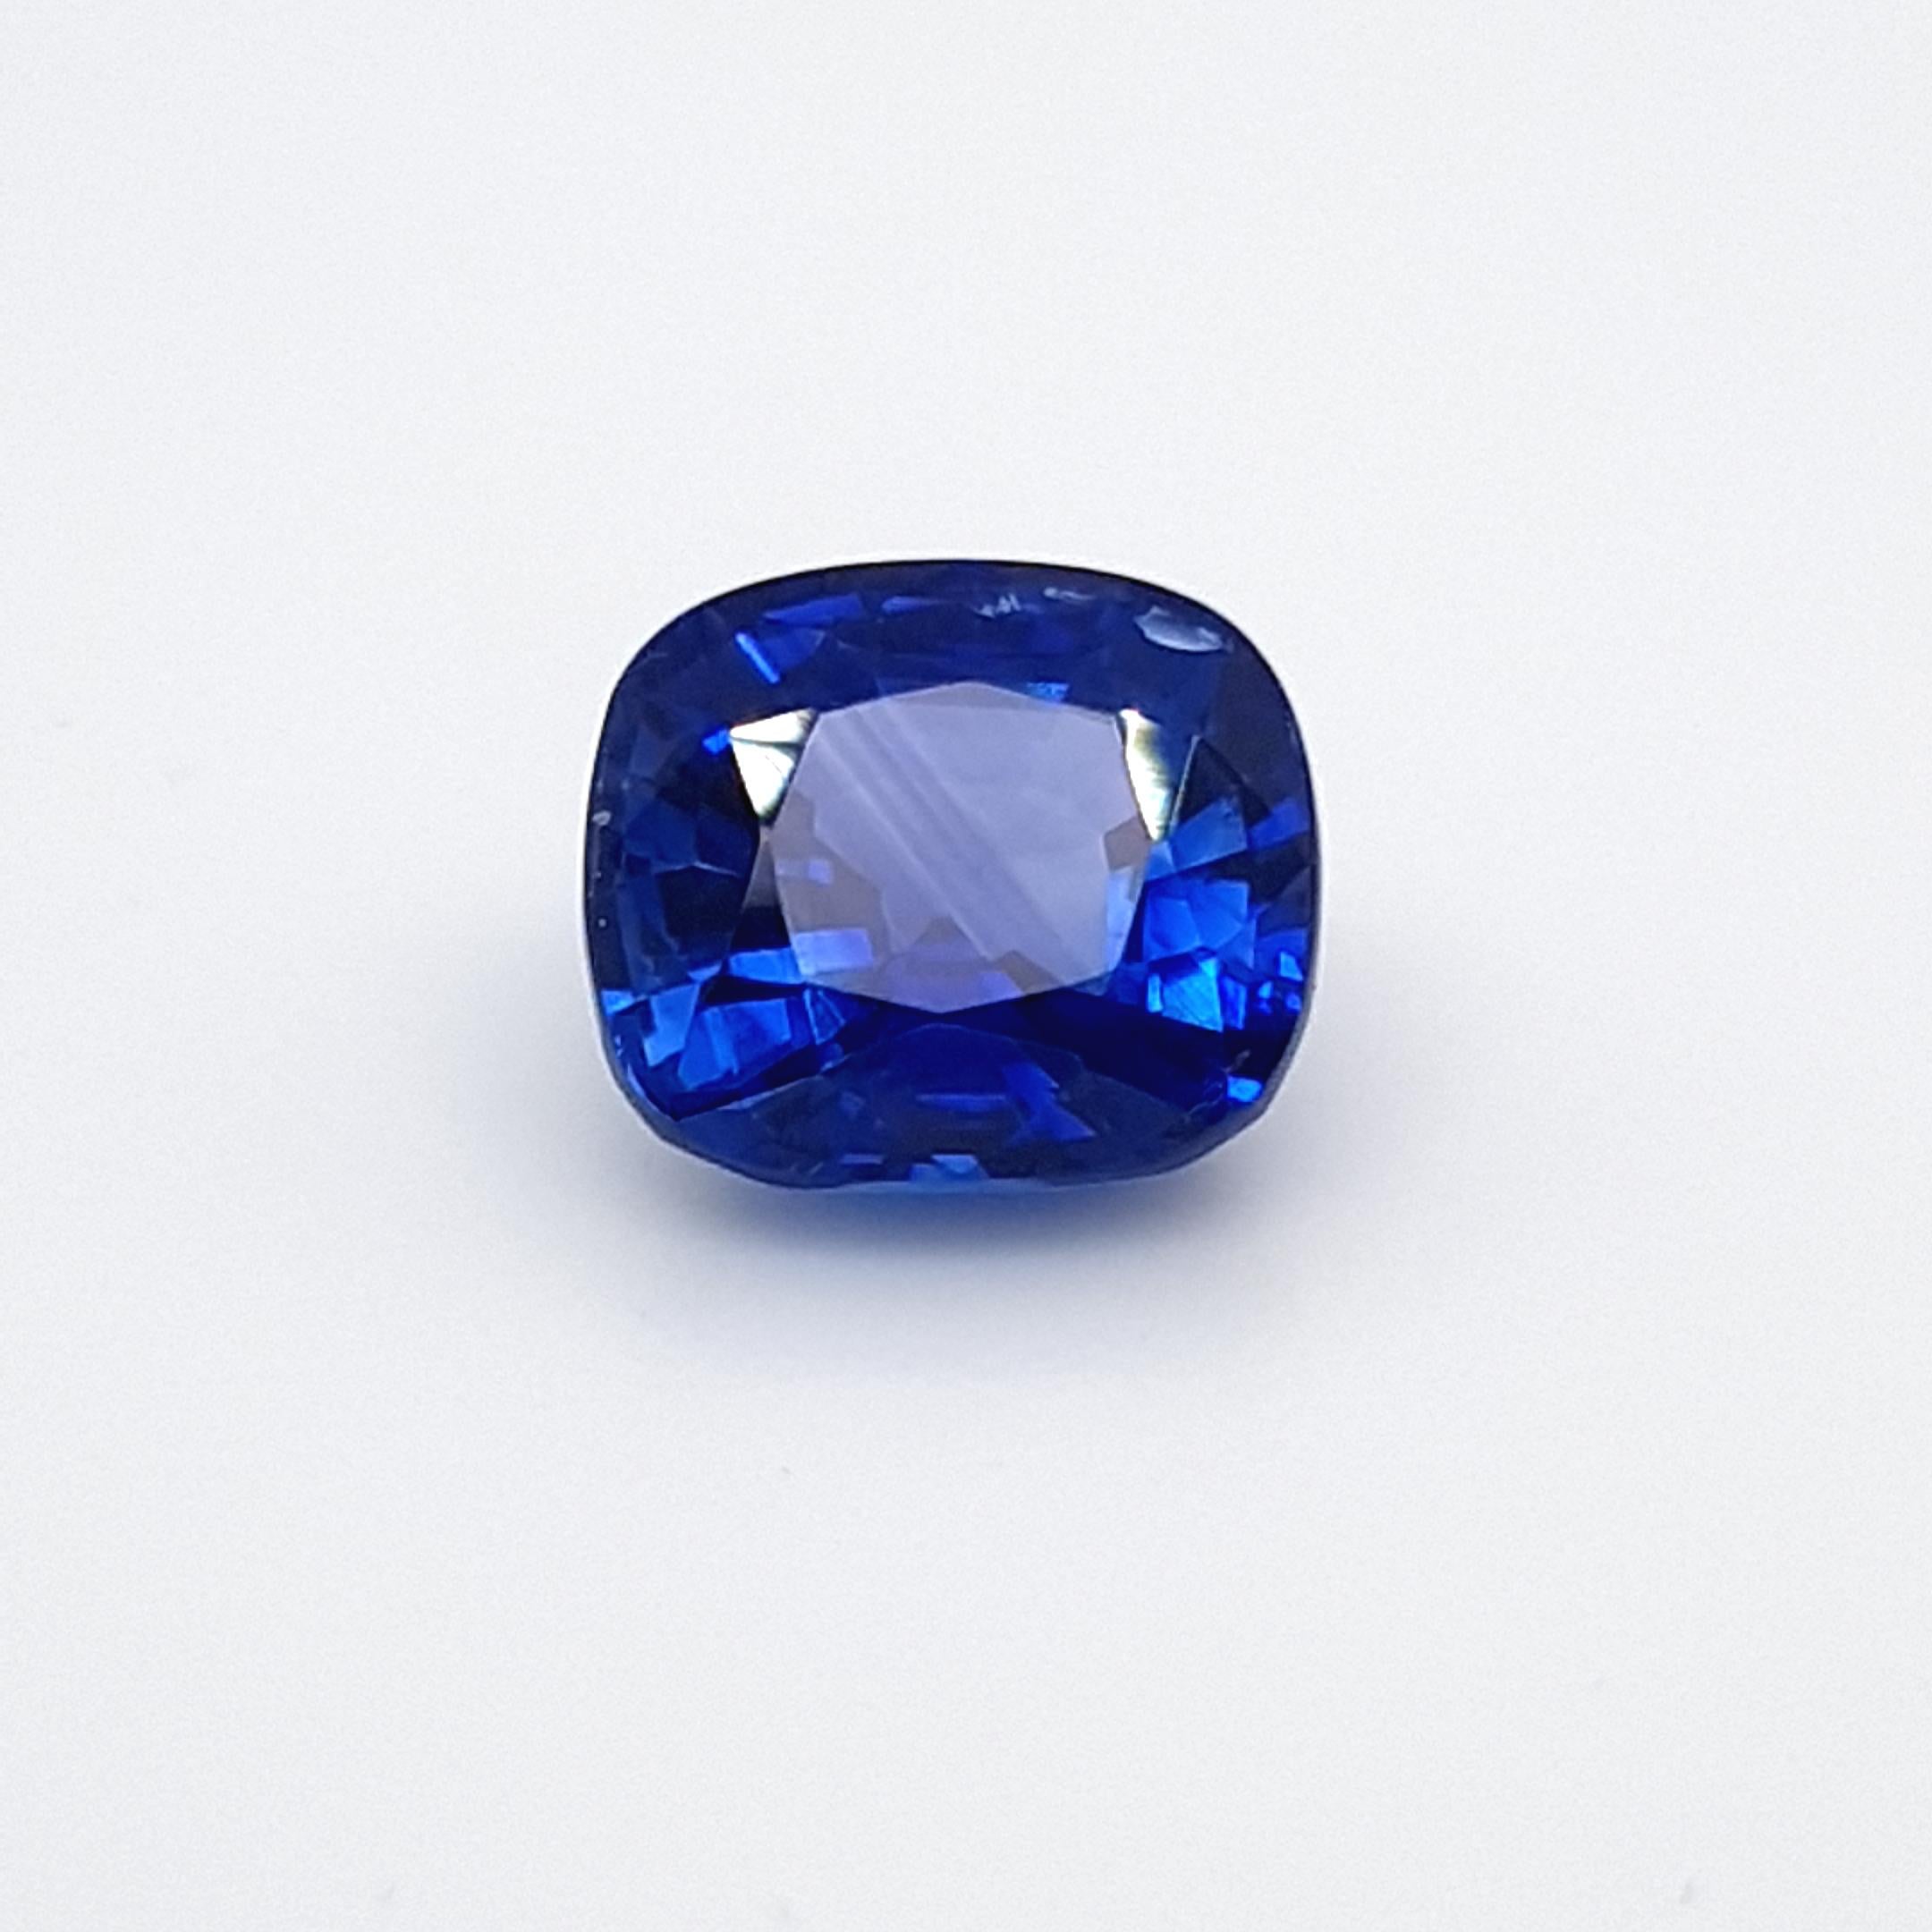 We are delighted to be able to offer for sale, this 4,27 ct. blue Sapphire from our exclusive collection.
This beautiful gem has a rich blue color and a great fire. Cutting, proportion and cleaness enable an very high light return from every